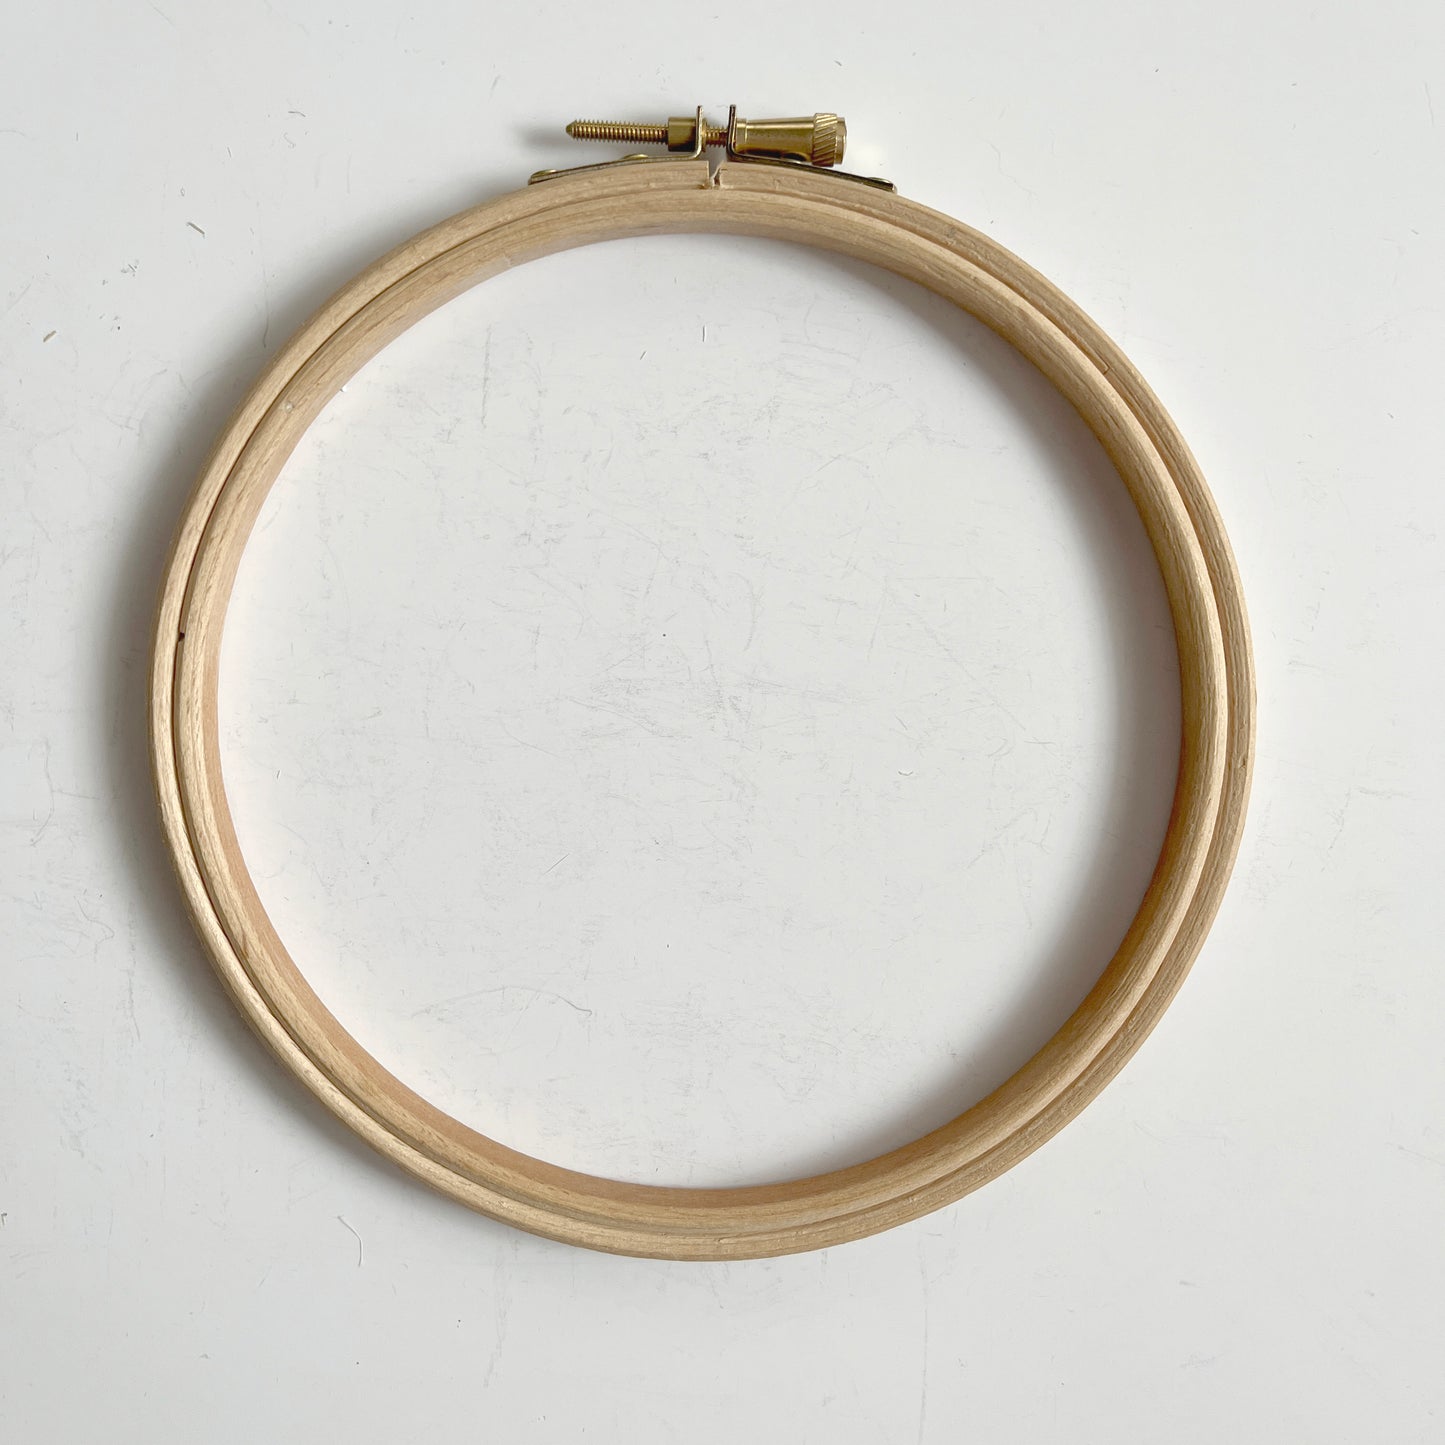 Random Embroidery Hoops - Vintage, thrifted, large sized, oval